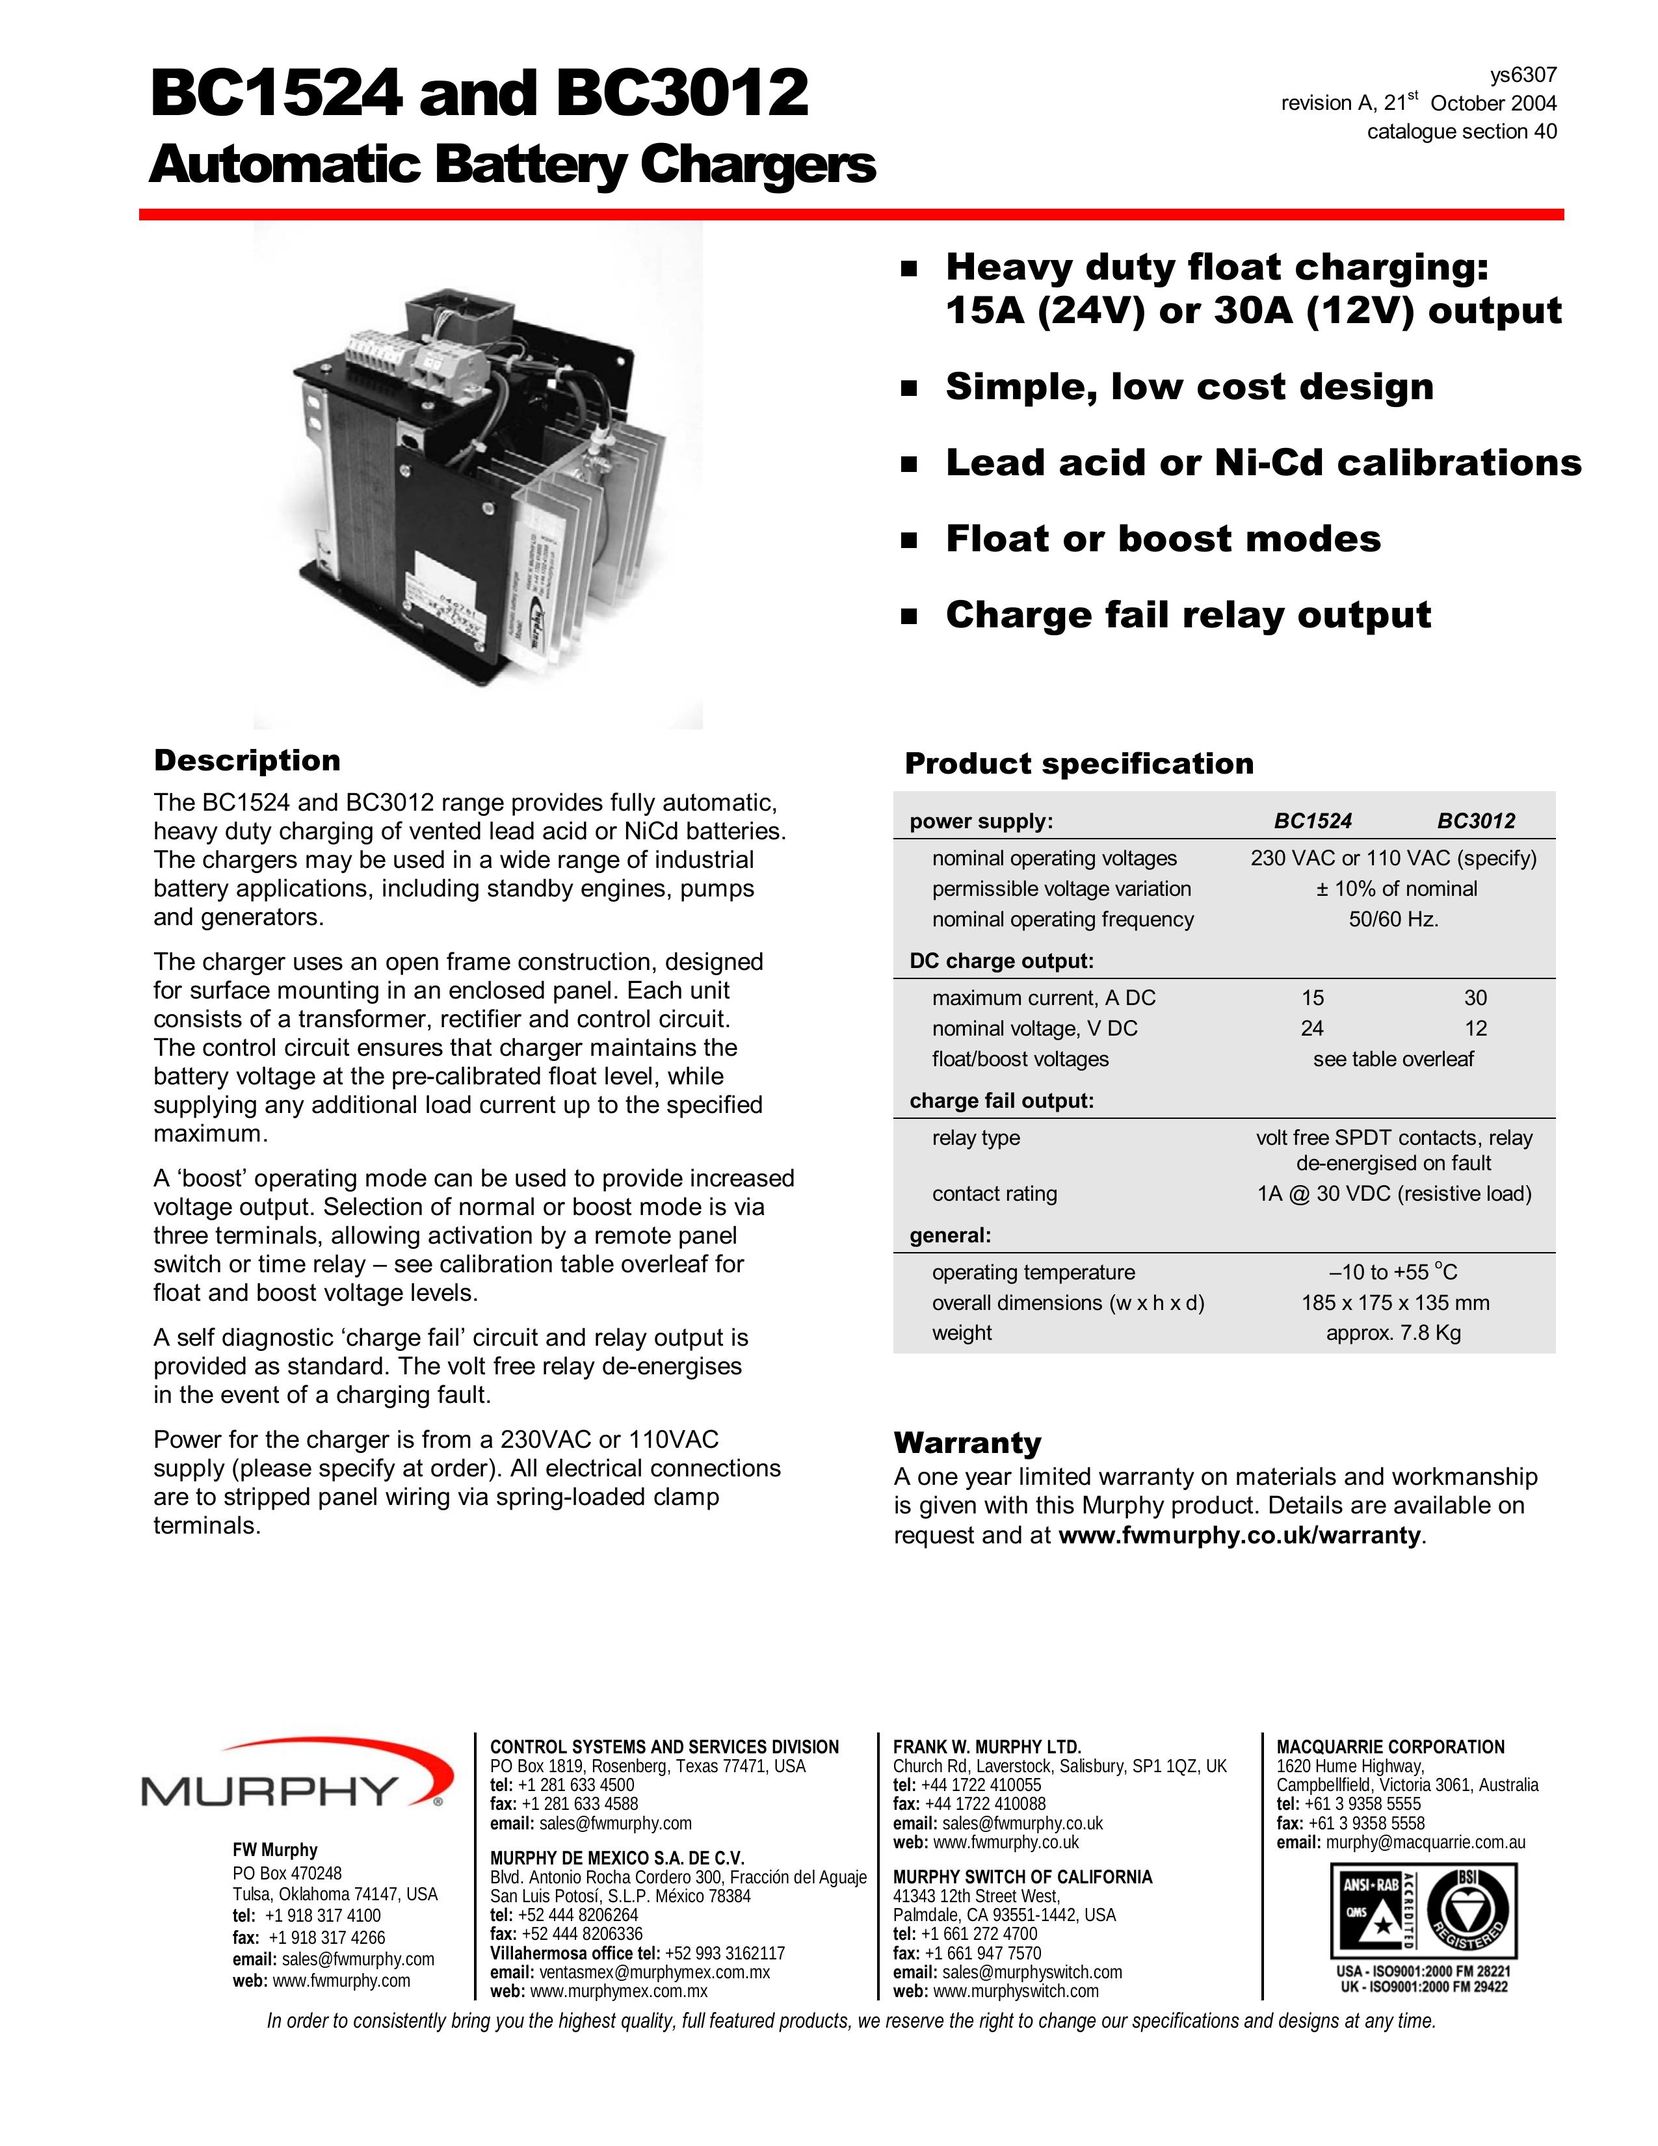 Murphy BC1524 Battery Charger User Manual